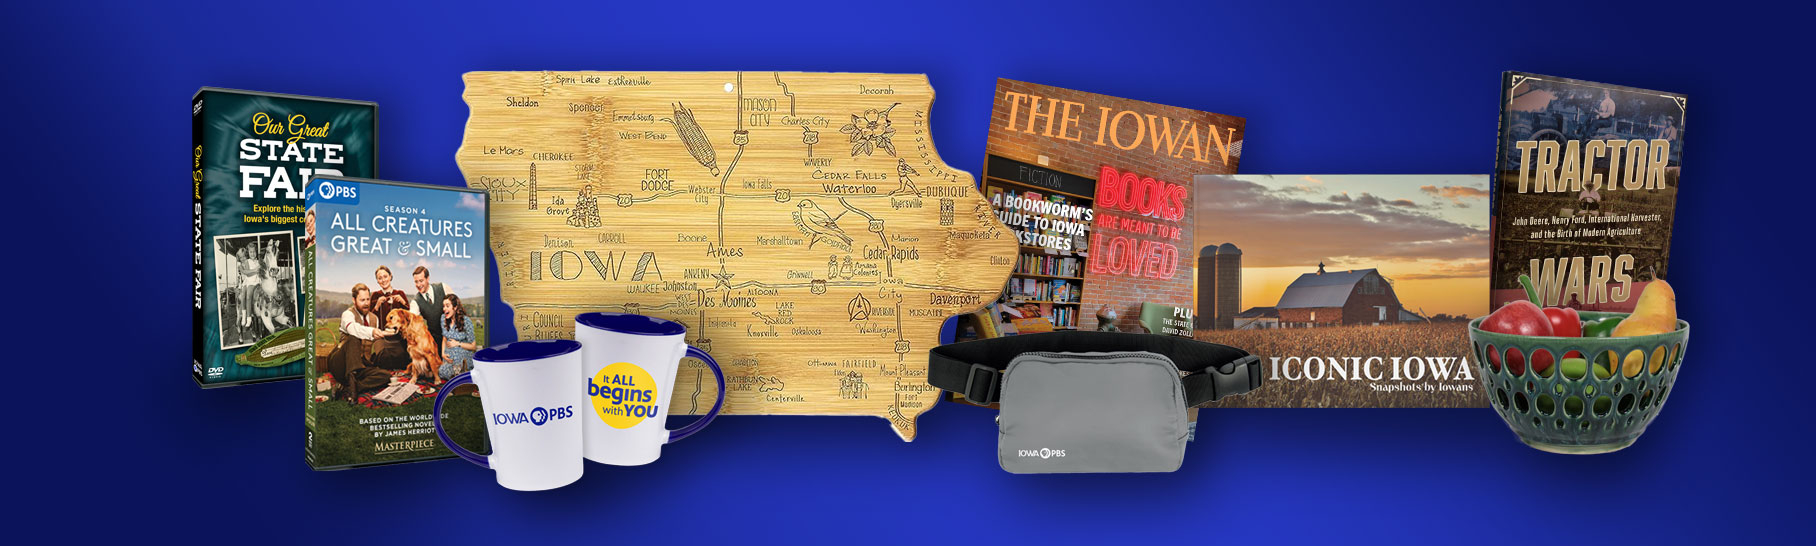 A collage of featured gifts including an Iowa die cut cutting board, your favorite shows on DVD, Iowa PBS mug, Iowan Magazine, Tractor Wars book, Iconic Iowa book and ceramic bowl